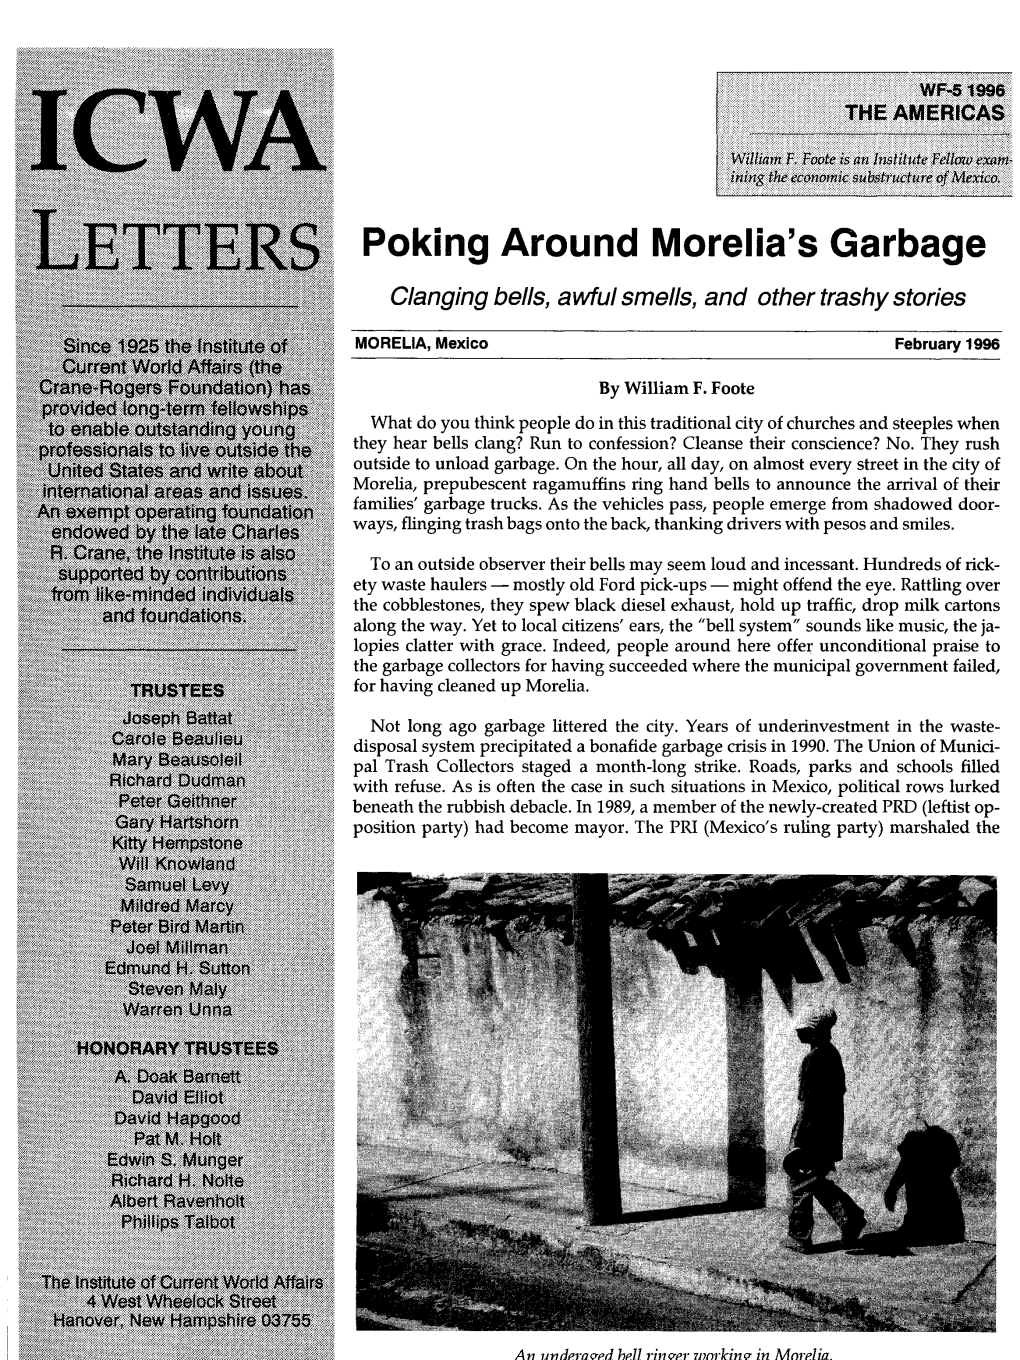 Poking Around Morelia's Garbage Clanging Bells, Awful Smells, and Other Trashy Stories